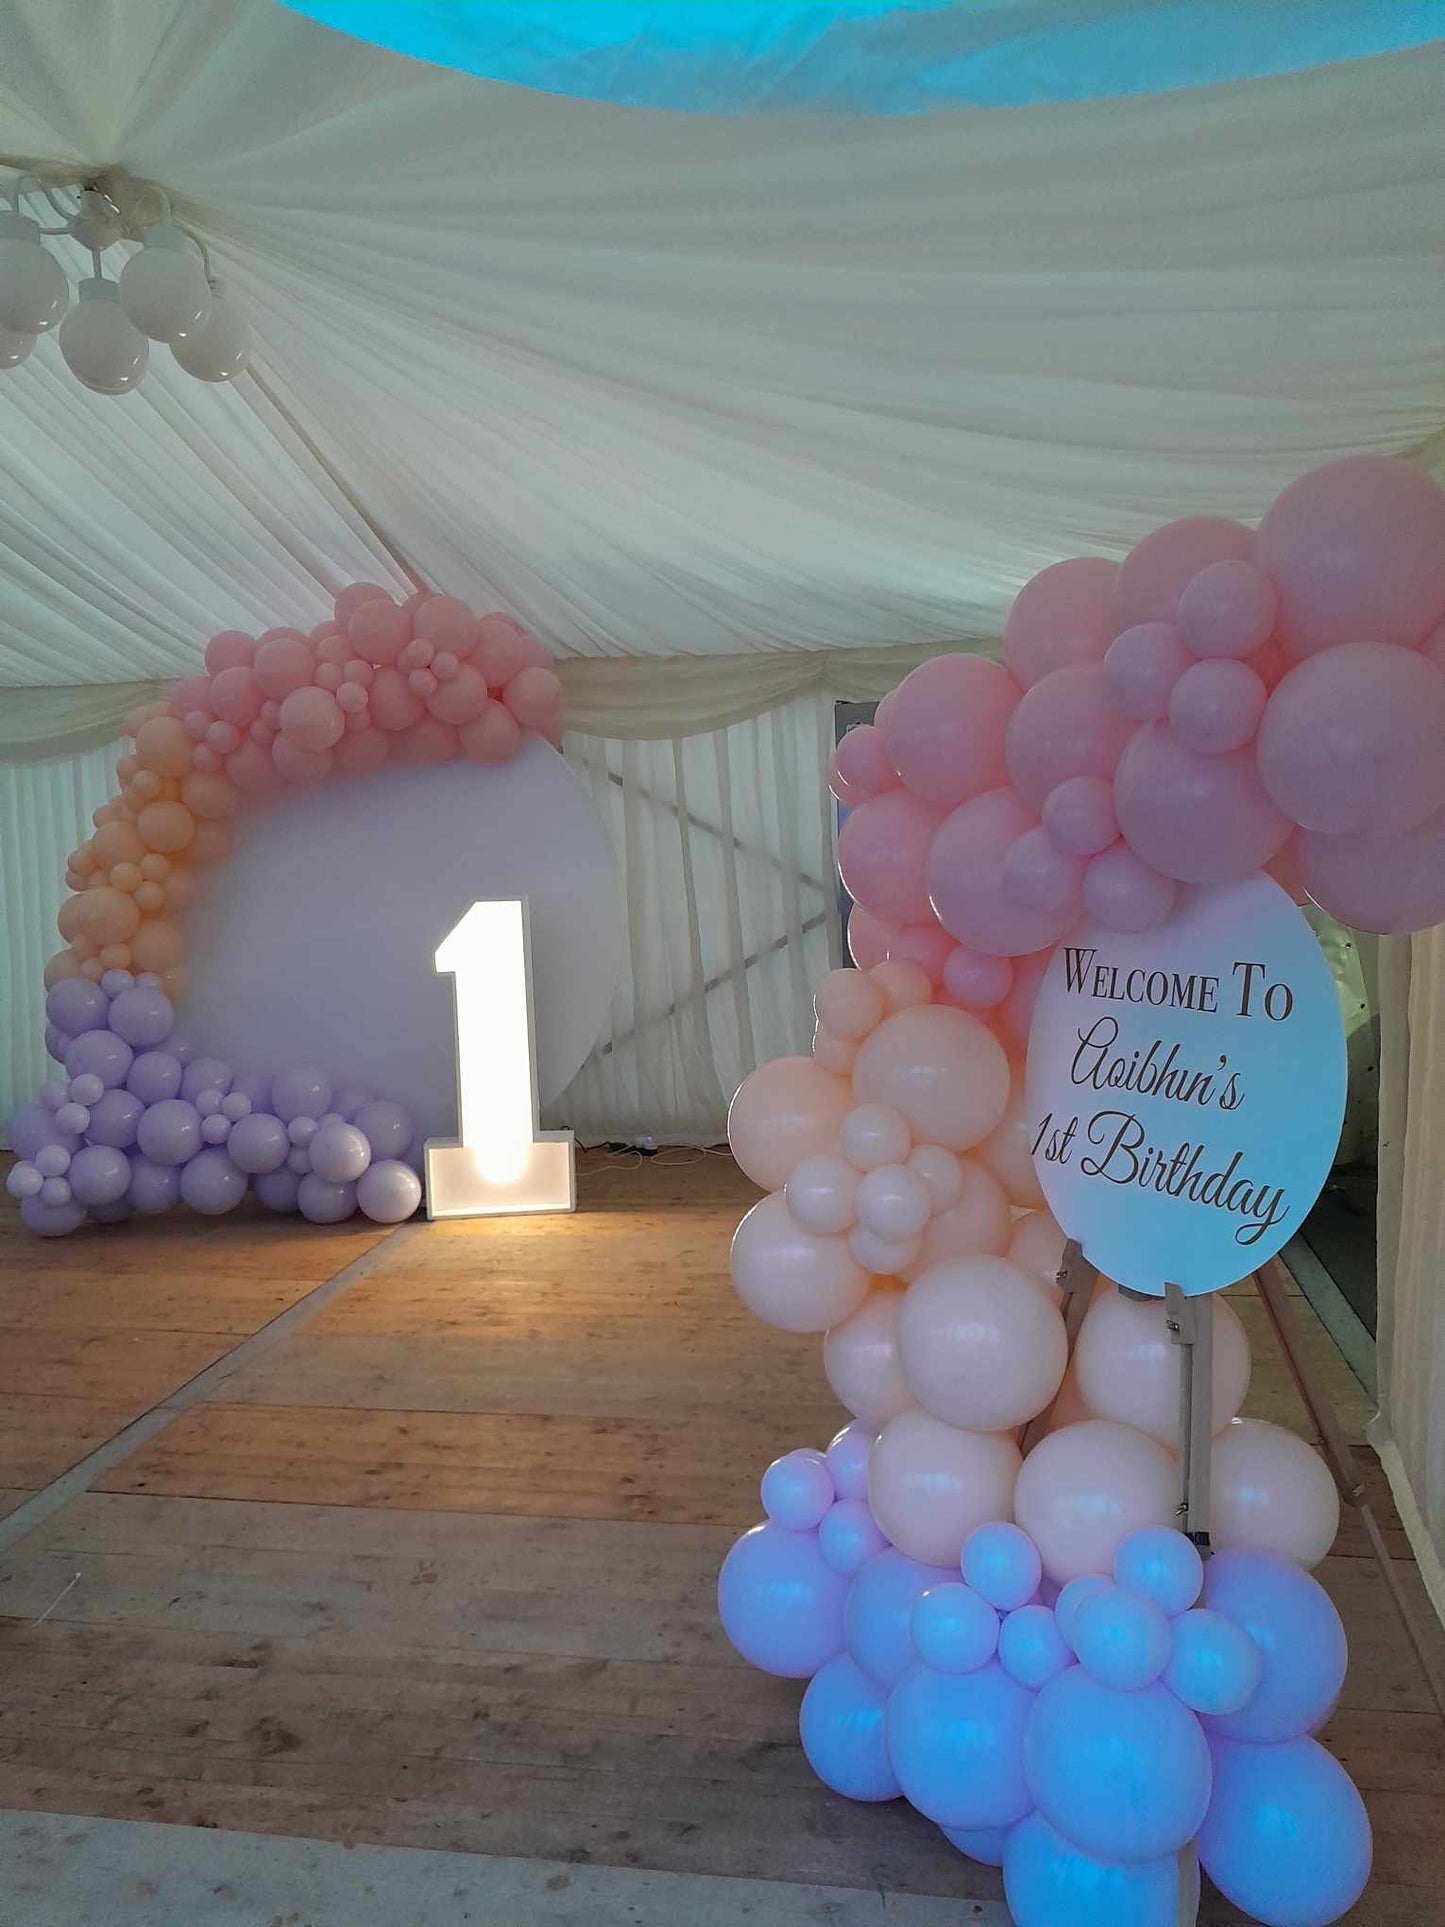 Welcome Signs with Balloons